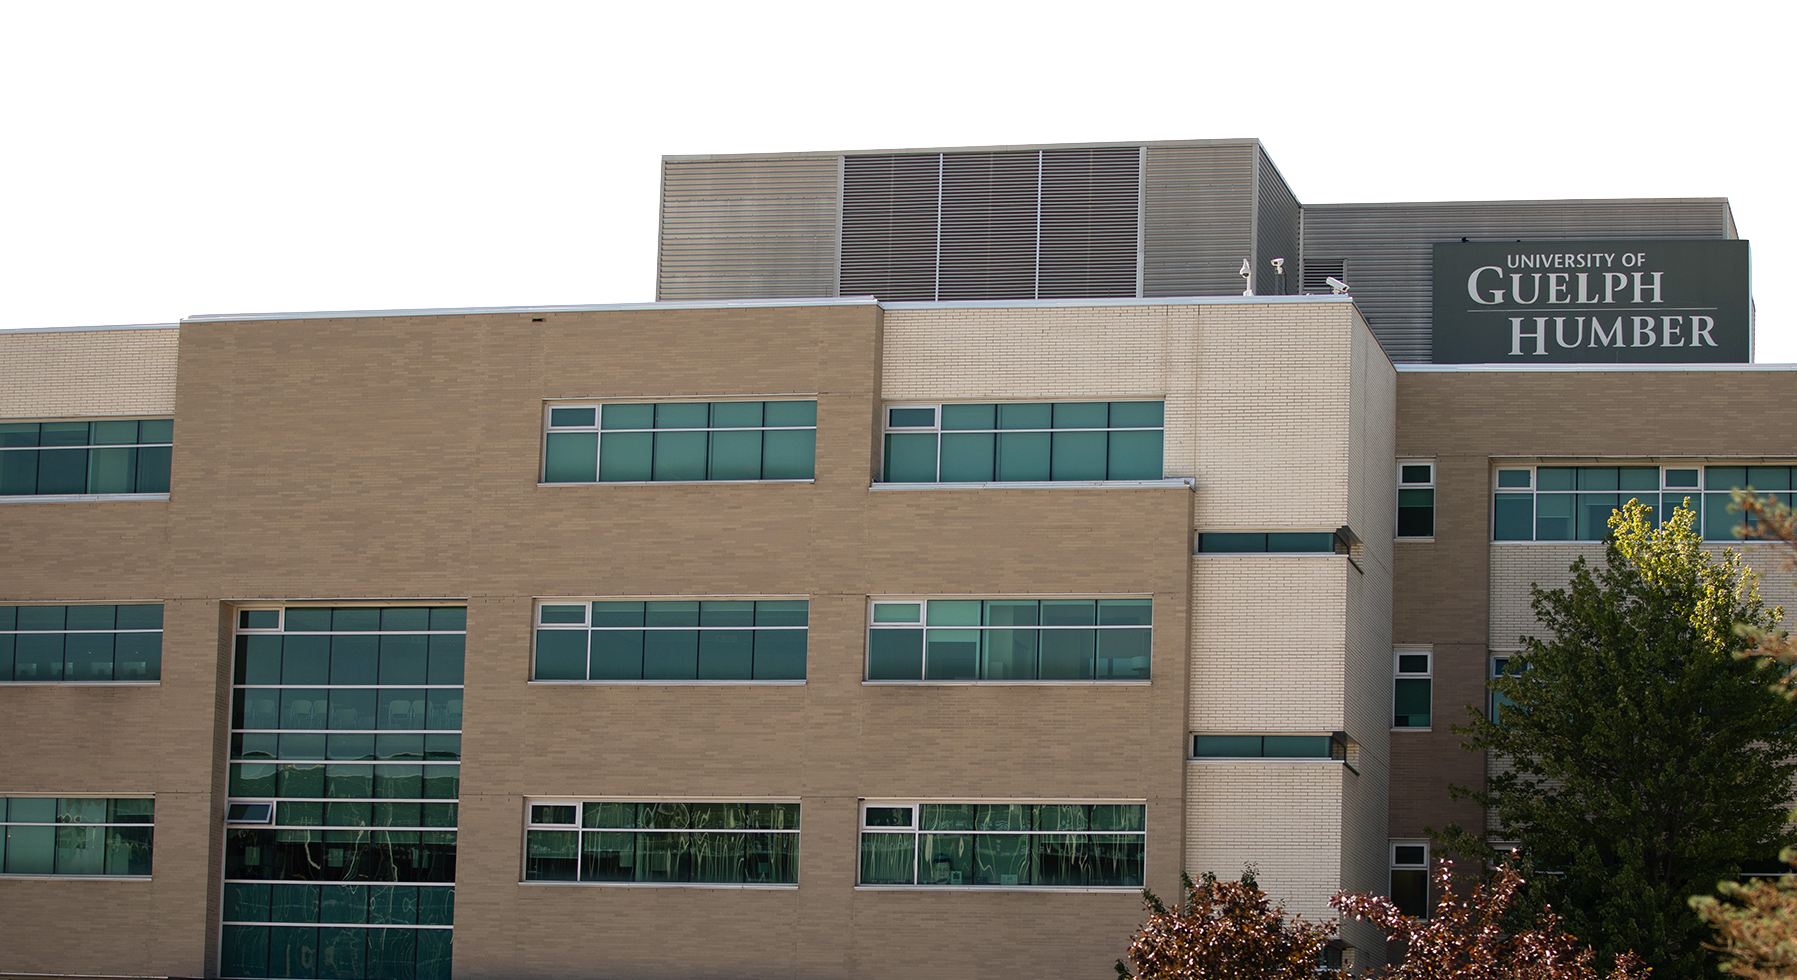 A guelph humber campus building